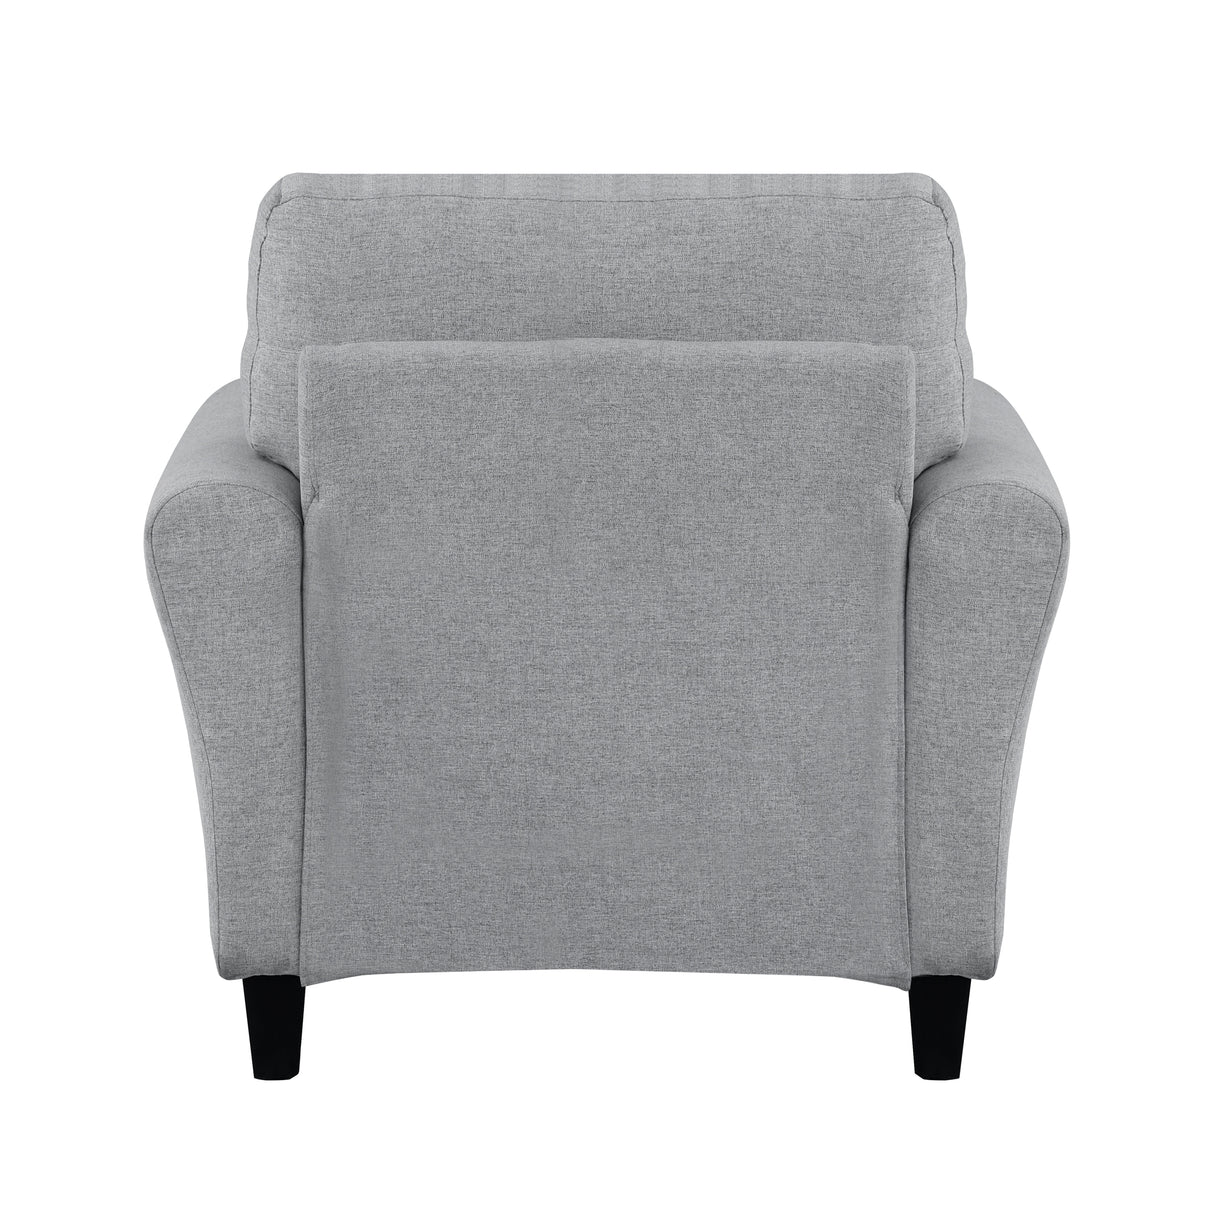 Modern 1pc Chair Dark Gray Textured Fabric Upholstered Rounded Arms Attached Cushion Transitional Living Room Furniture - Home Elegance USA